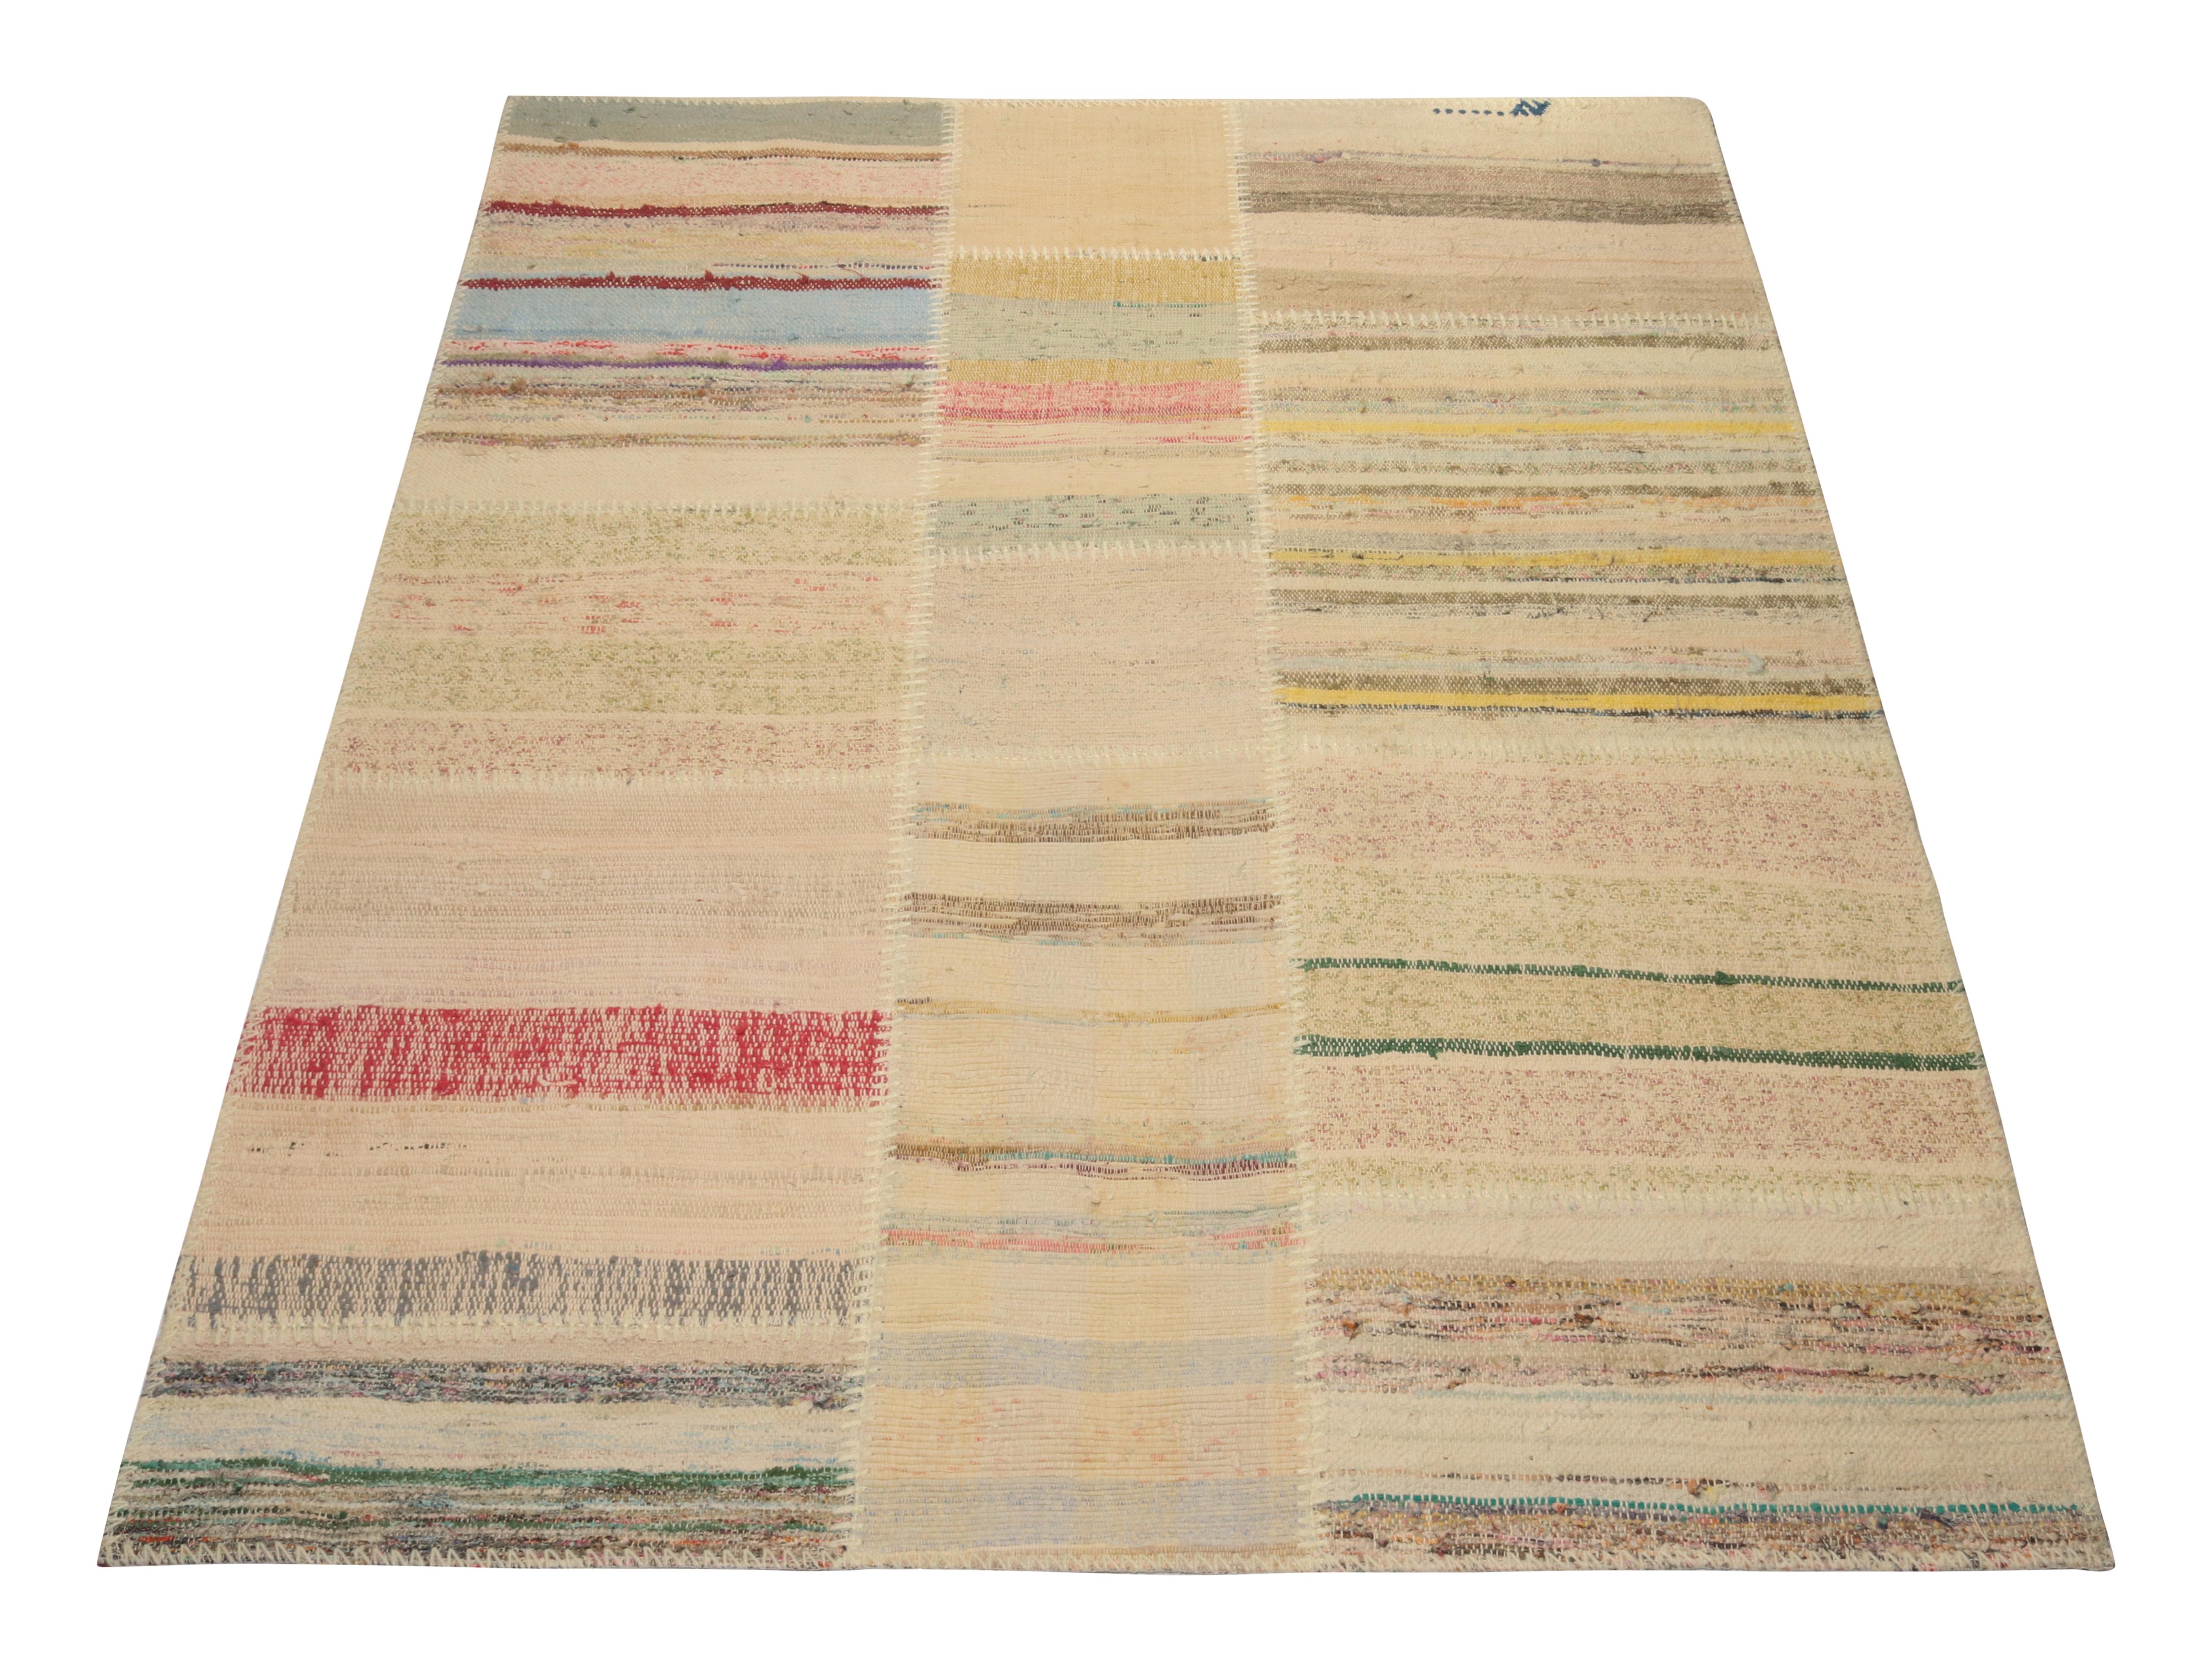 Handwoven in wool, Rug & Kilim presents a 4x5 contemporary rug from their innovative new patchwork kilim collection. 

On the Design: 

This flat weave technique repurposes vintage yarns in polychromatic stripes and striae, achieving a playful